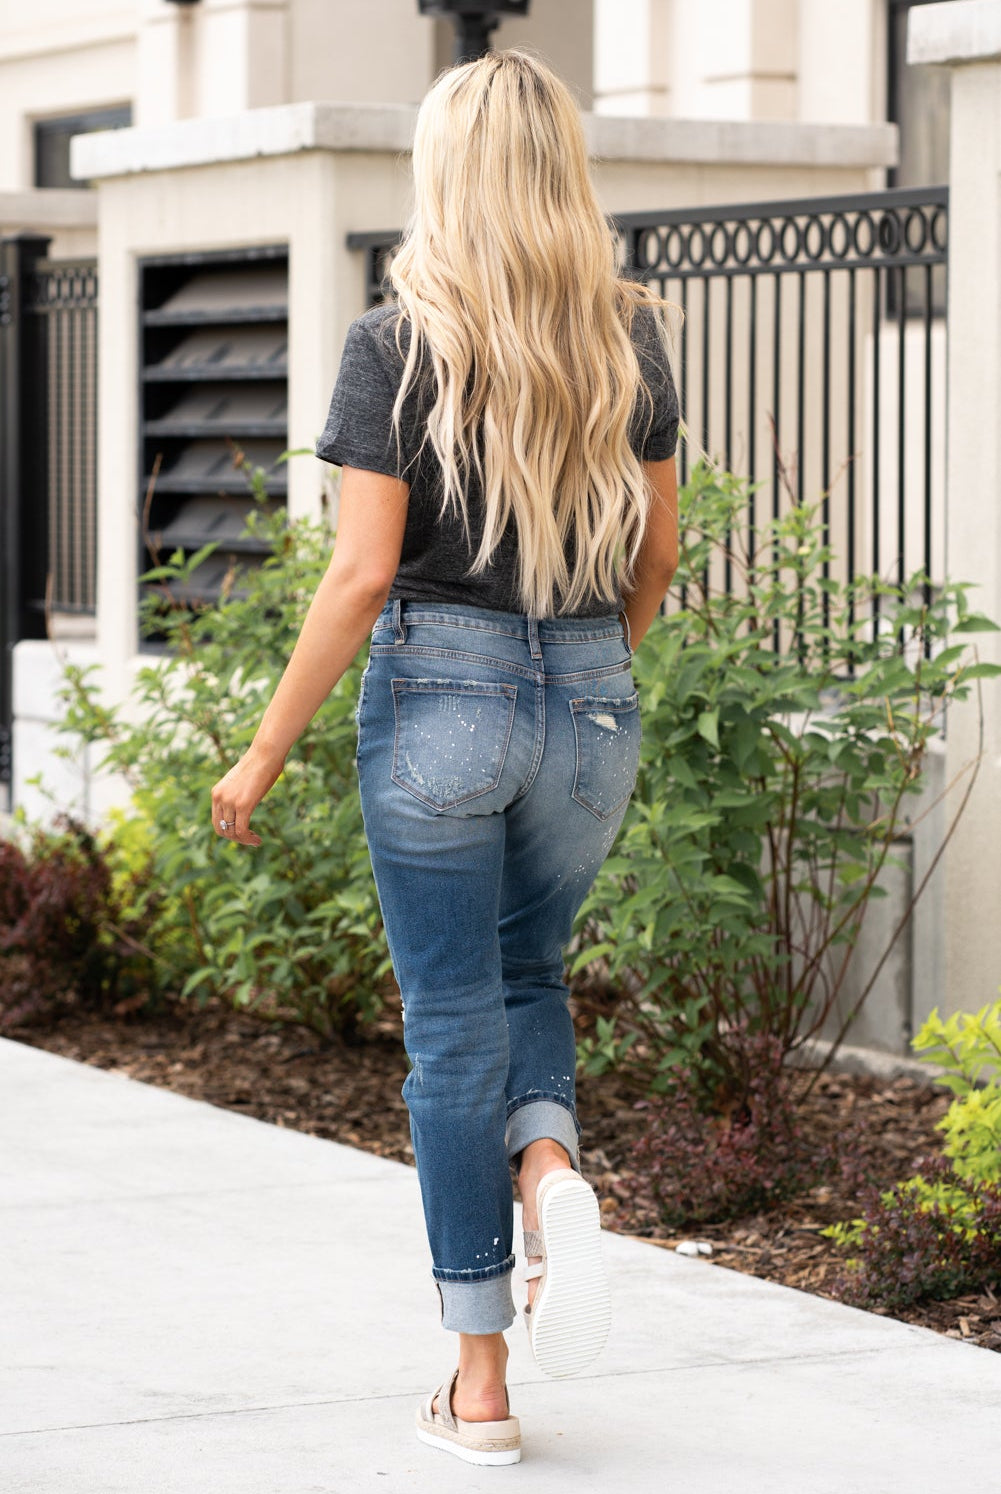 KanCan Jeans Color: Medium Blue Wash Cut: Cuffed Boyfriend Skinny, 27" Inseam Rise: High-Rise, 9.75" Front Rise 99% Cotton, 1% Spandex Stitching: Classic Fly: Zipper  Style #: KC8368M Contact us for any additional measurements or sizing.  Haley is 5’6" and wears size 1 in jeans, a small top and 7.5 in shoes. She is wearing a size 24/1 in these jeans.